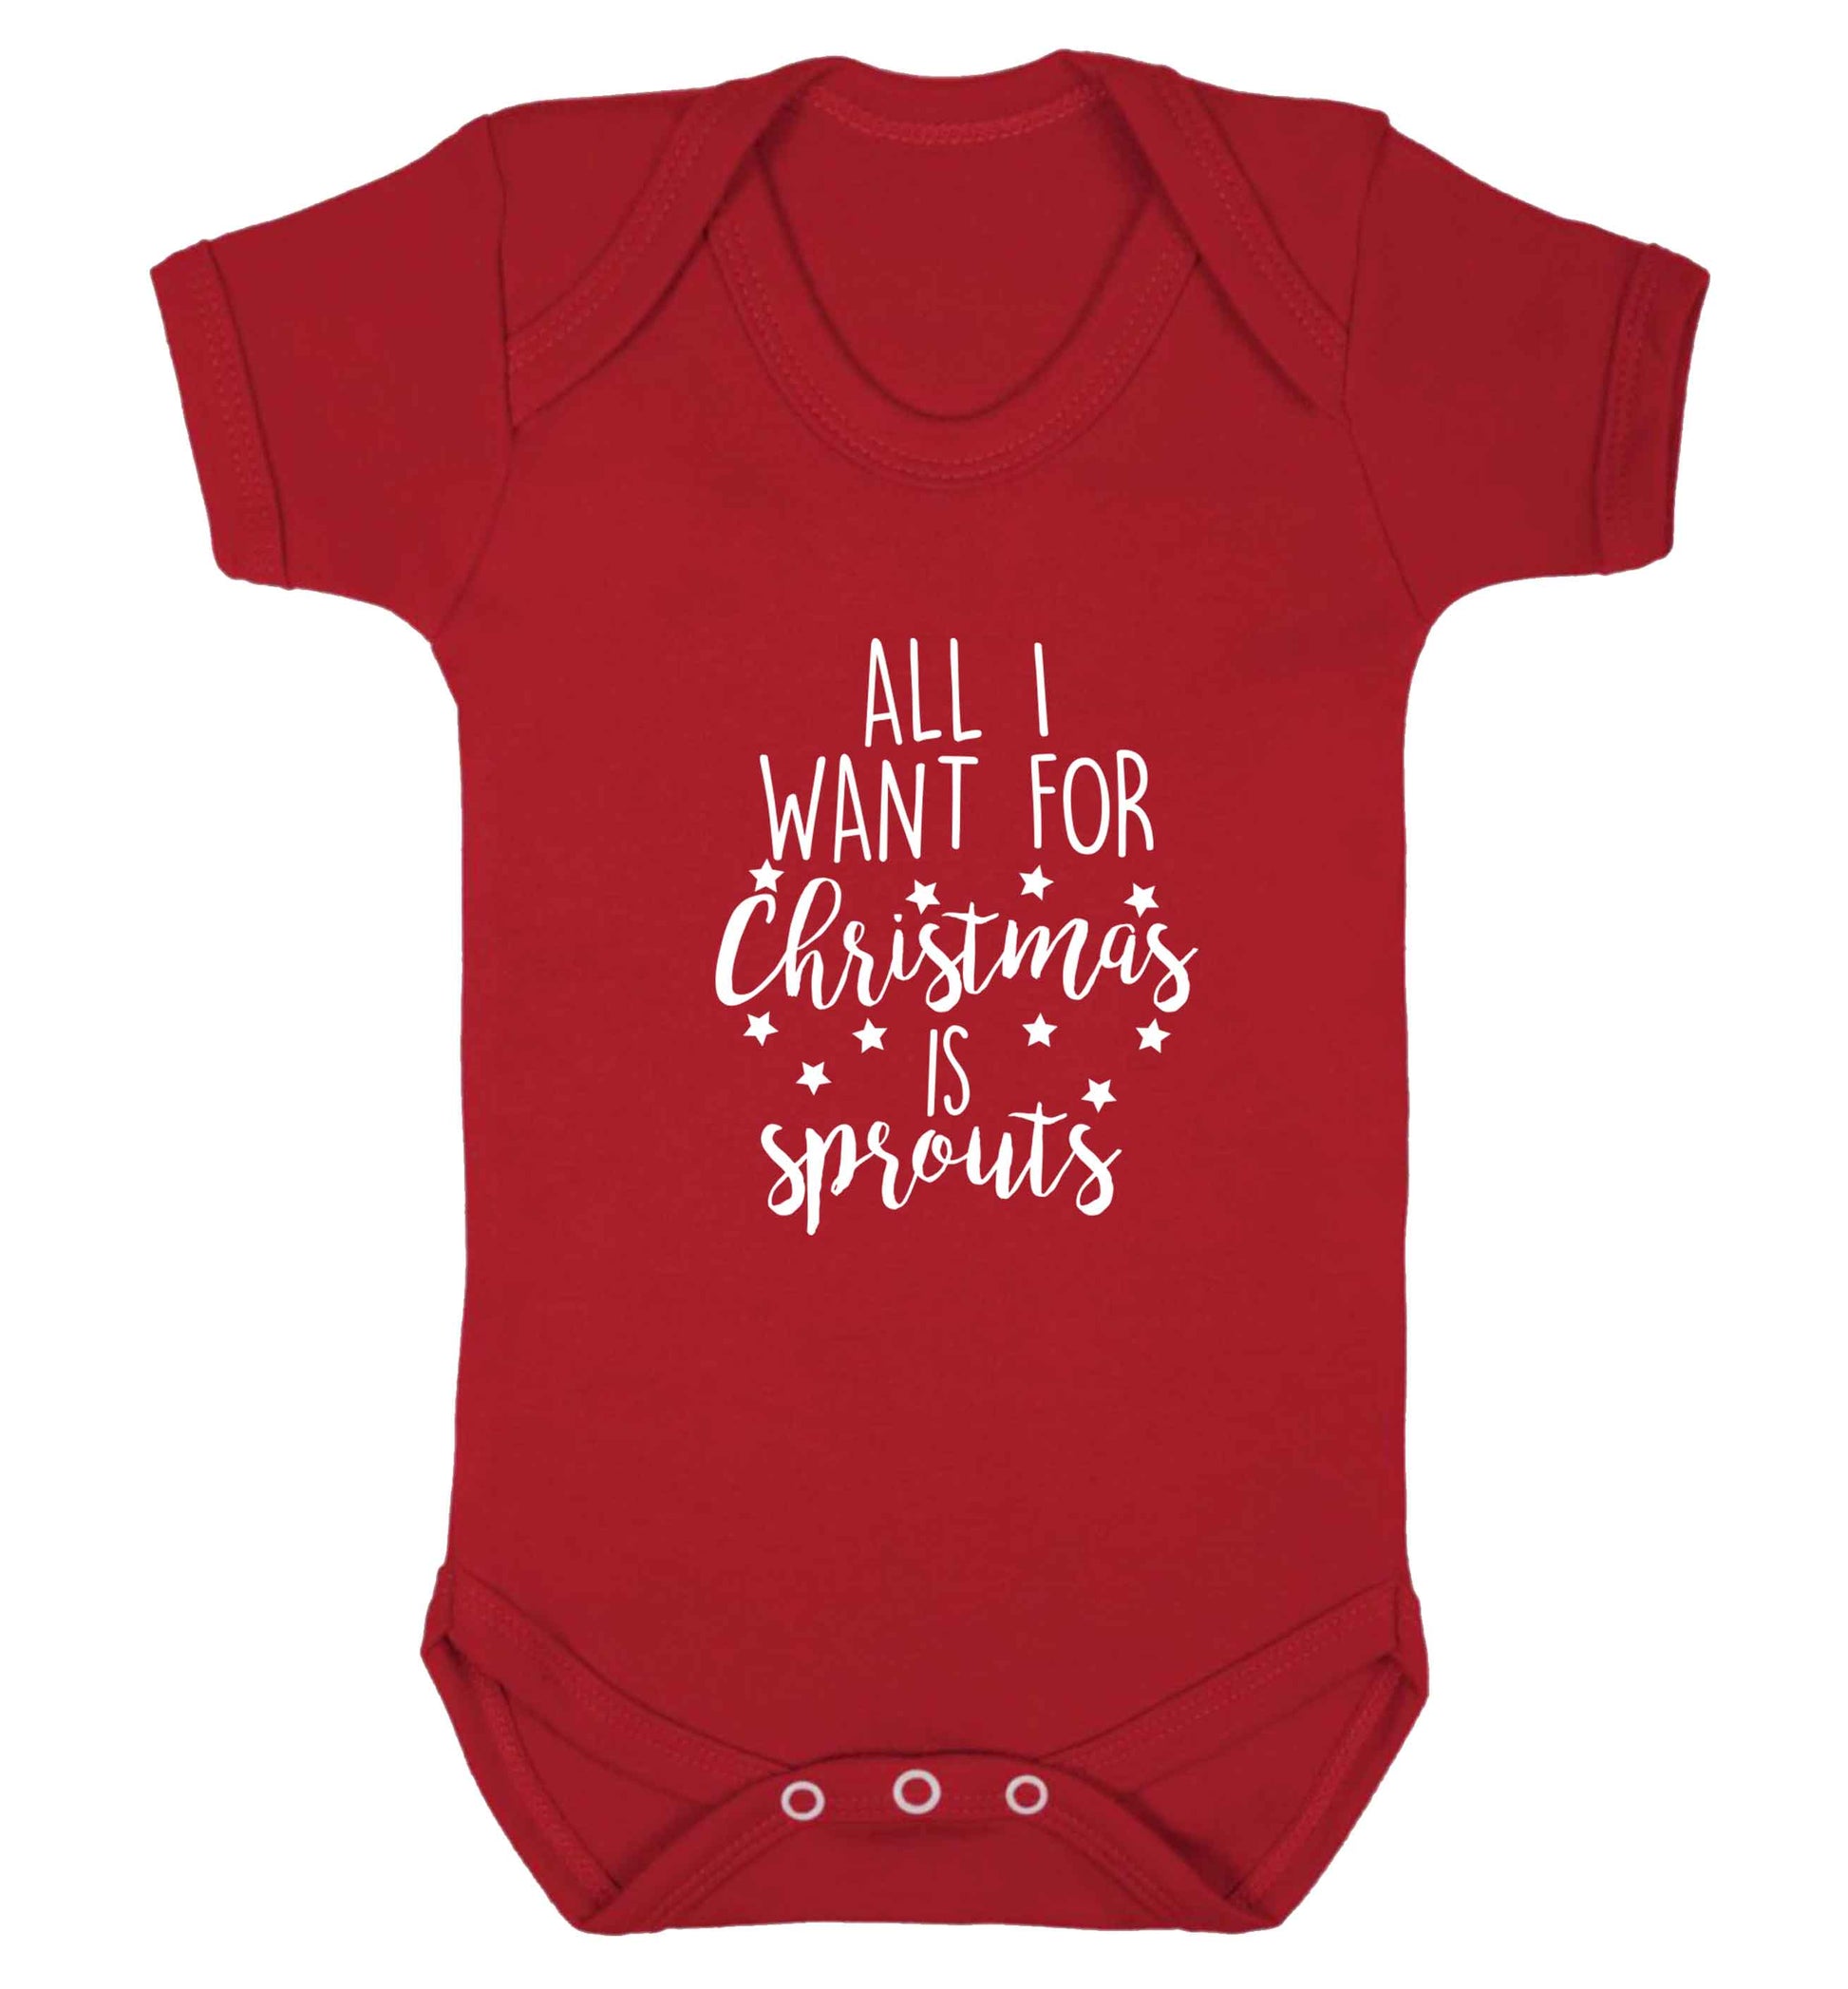 All I want for Christmas is sprouts baby vest red 18-24 months